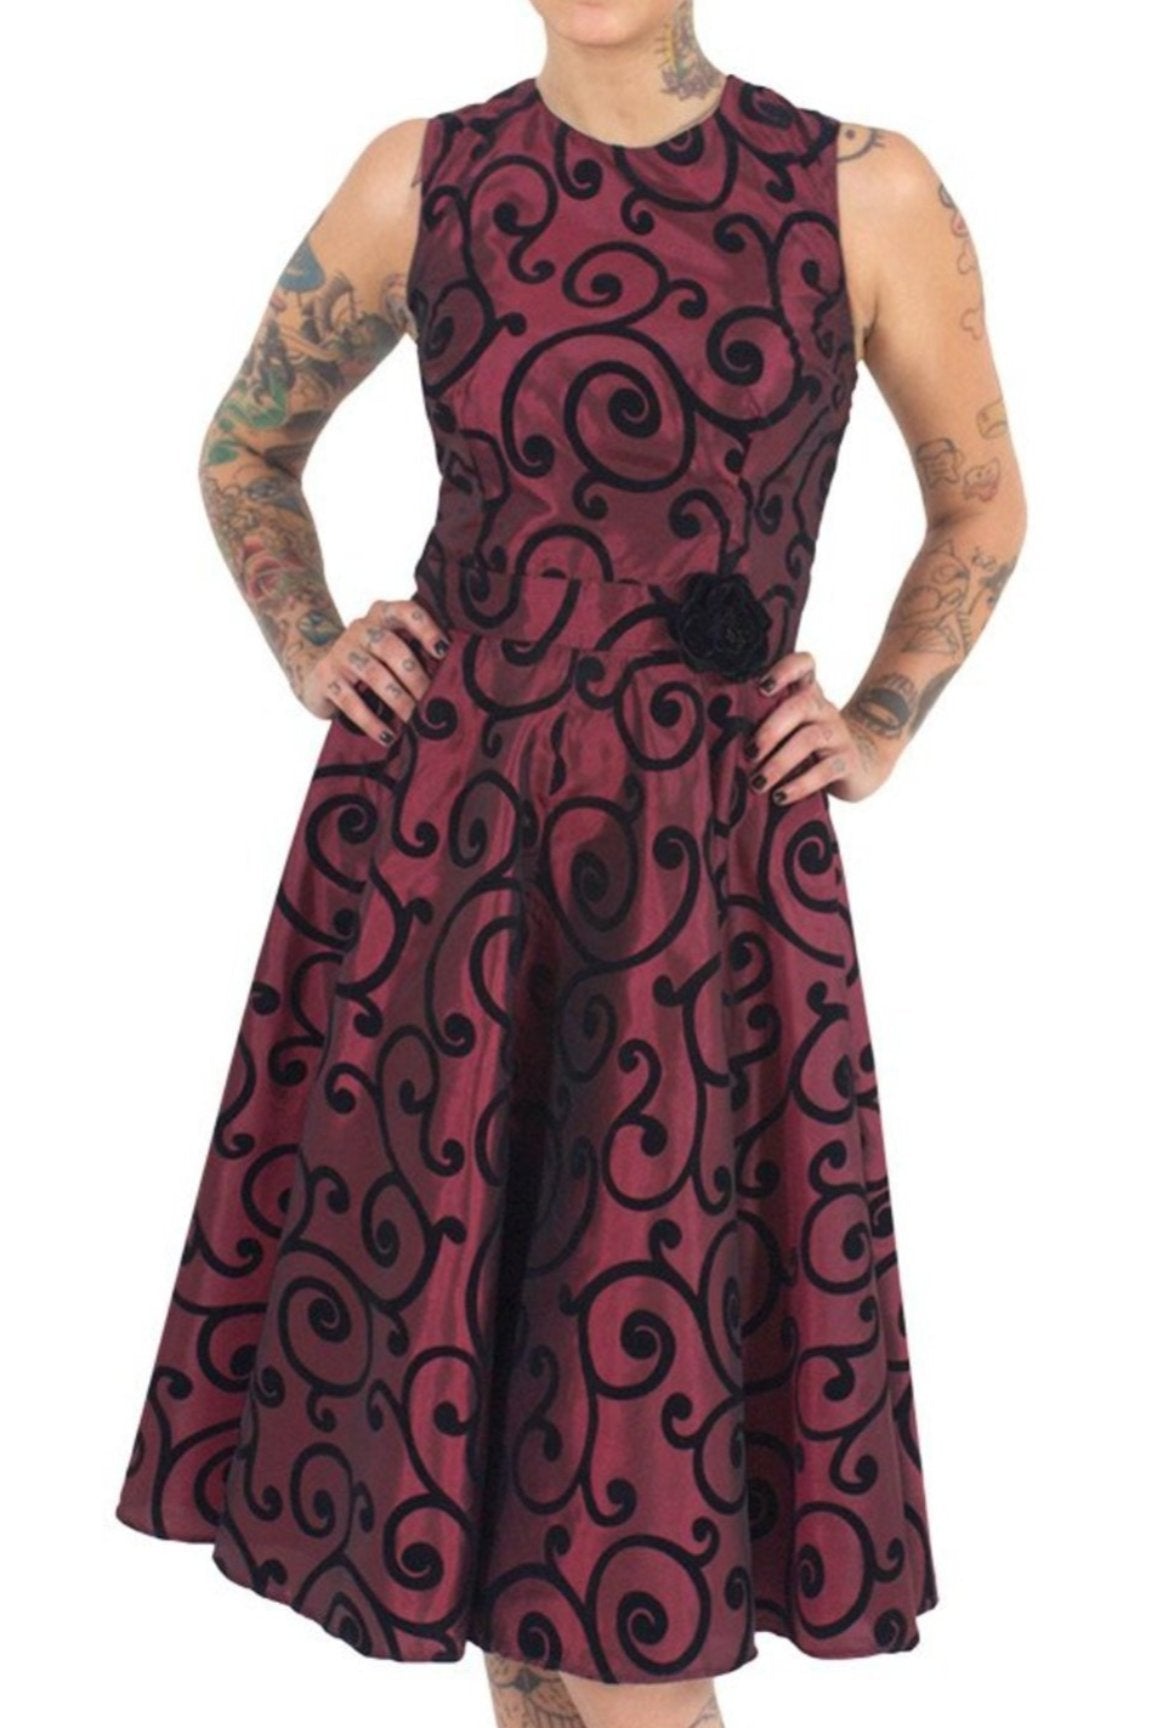 The BELLA Full Circle Dress - SIZE SMALL ONLY!